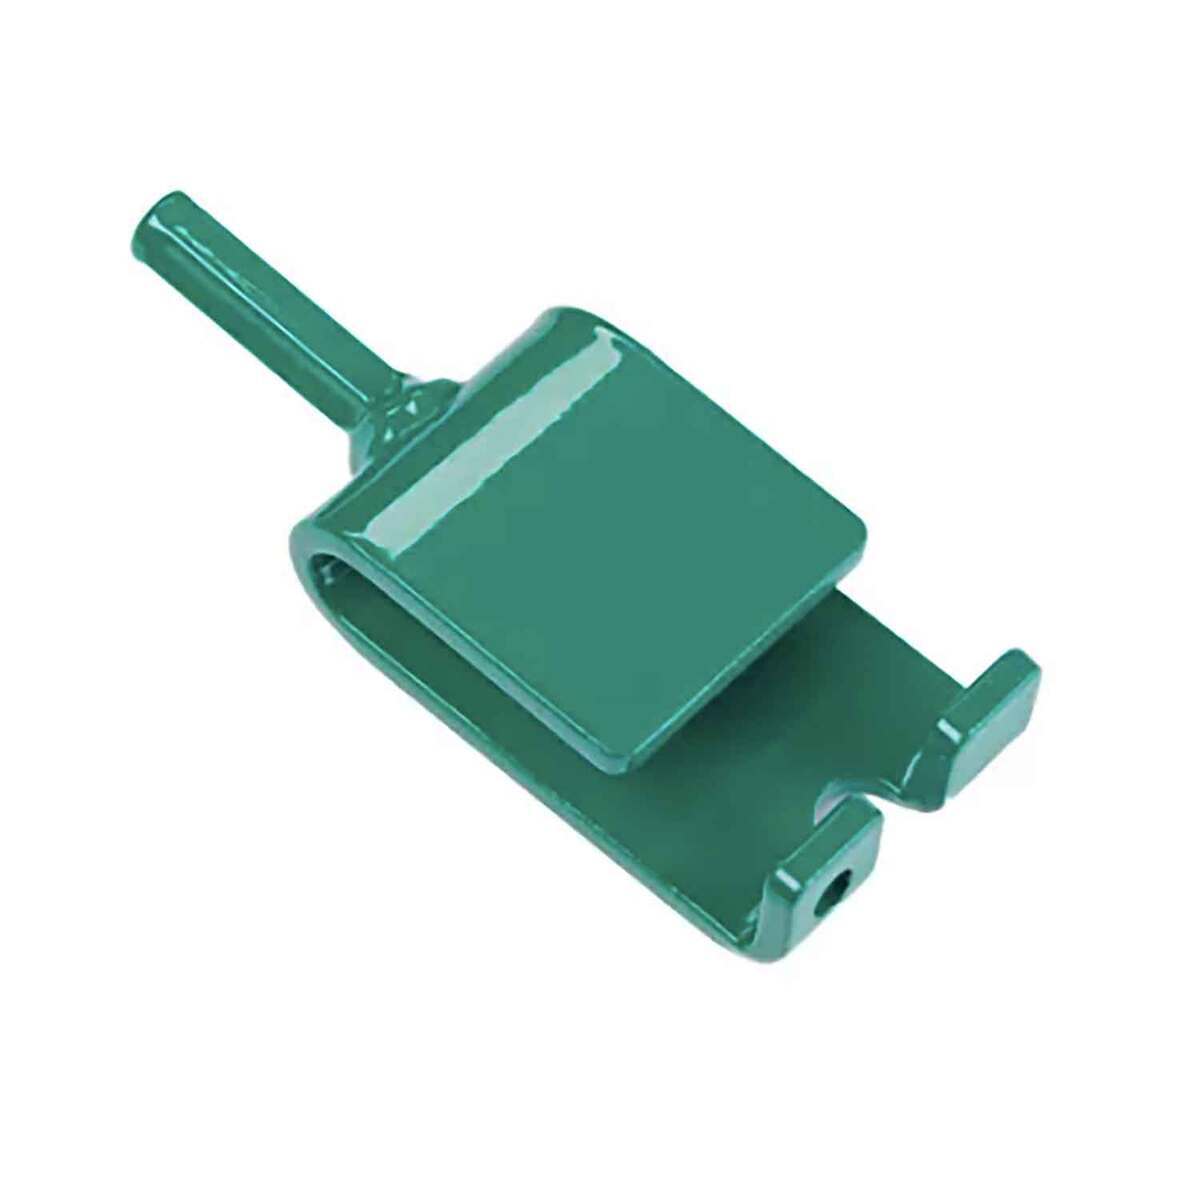 Lost Creek Ice Anchor Drill Adapter Ice Fishing Shelter Accessory - Green by Sportsman's Warehouse